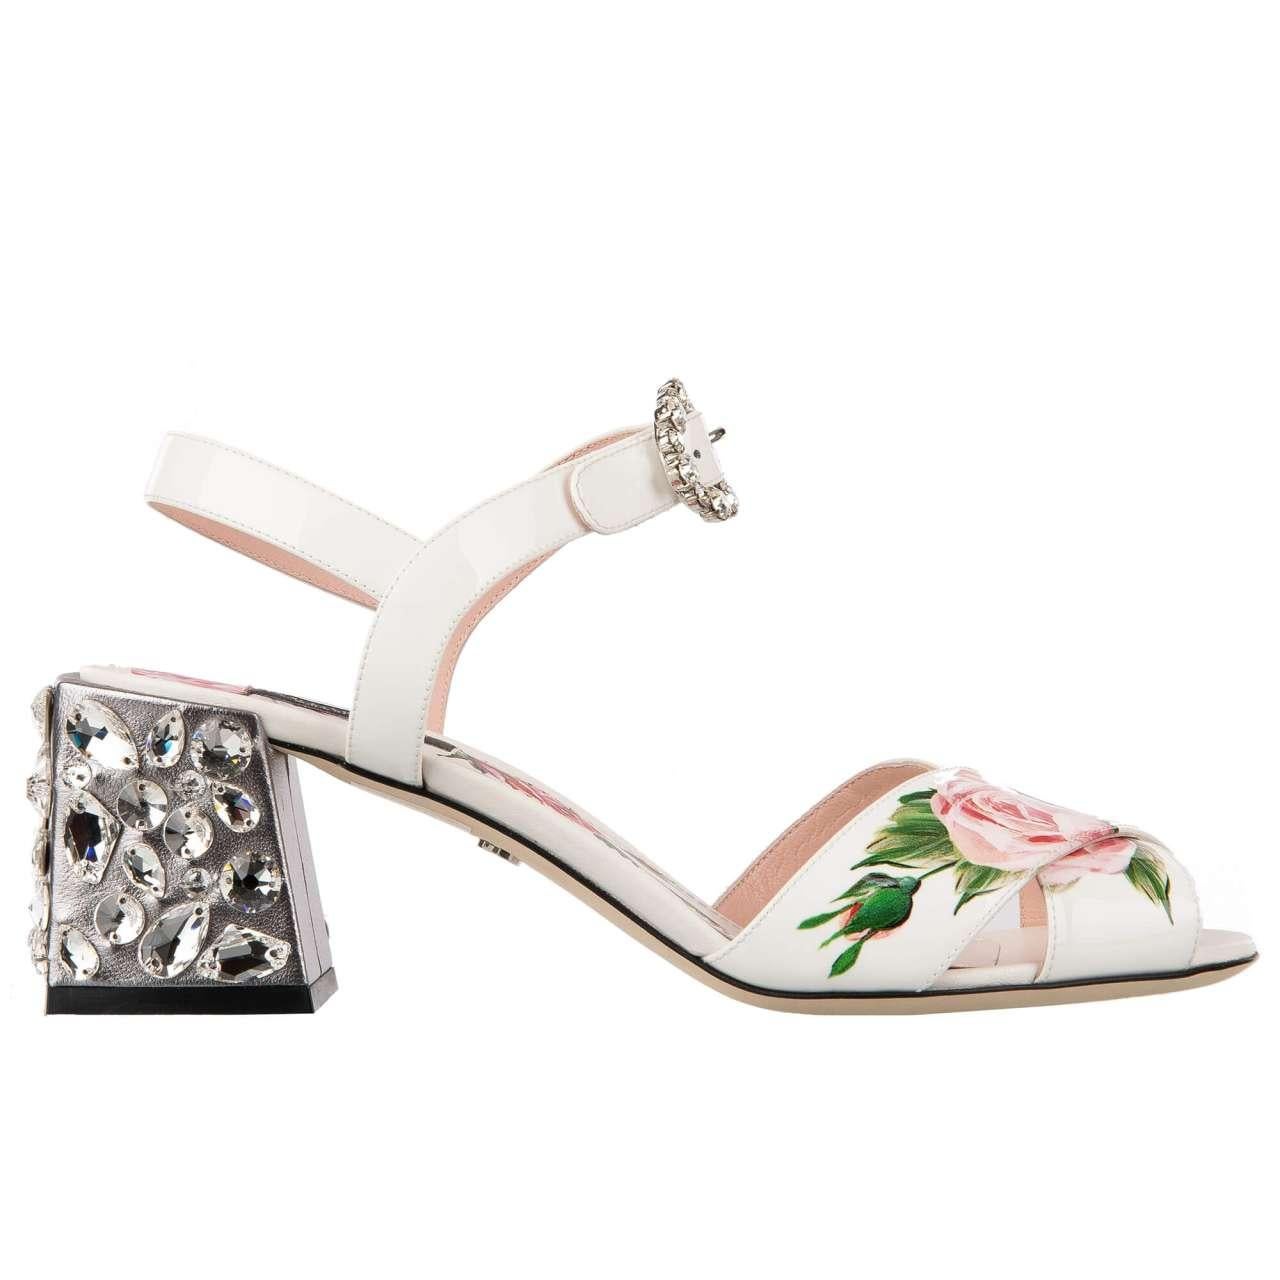 D&G Patent Leather Rose Pumps Sandals KEIRA with Crystal Heel White Silver 35 For Sale 3